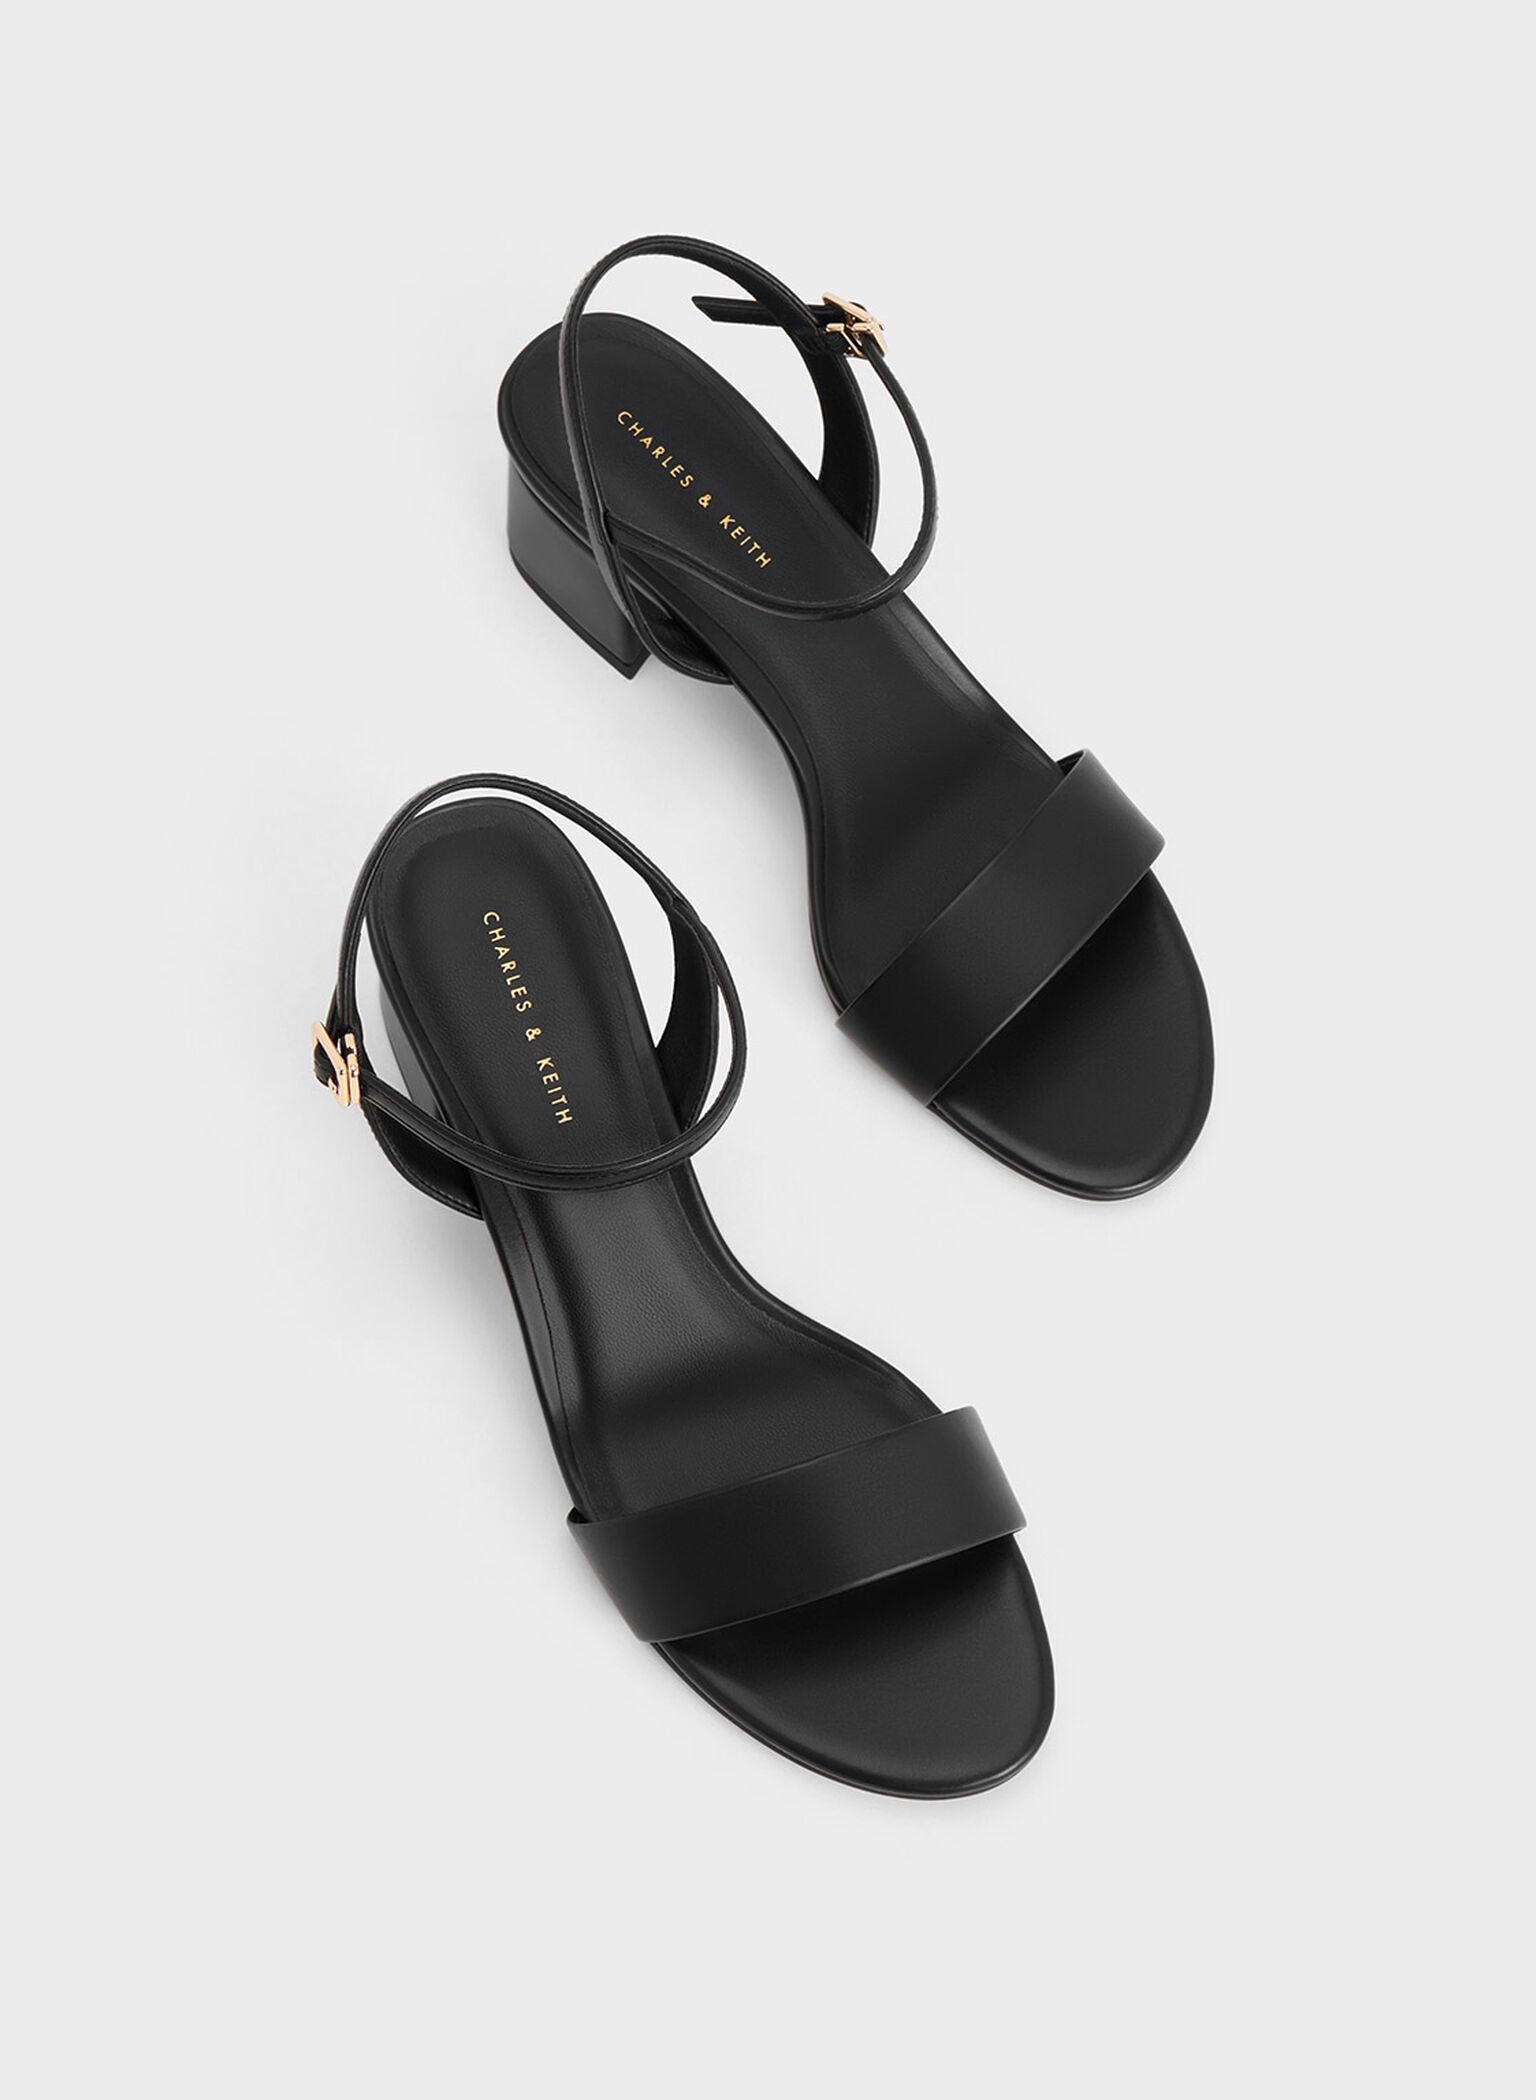 Black Open Toe Ankle Strap Block Heel Sandals - CHARLES & KEITH PH